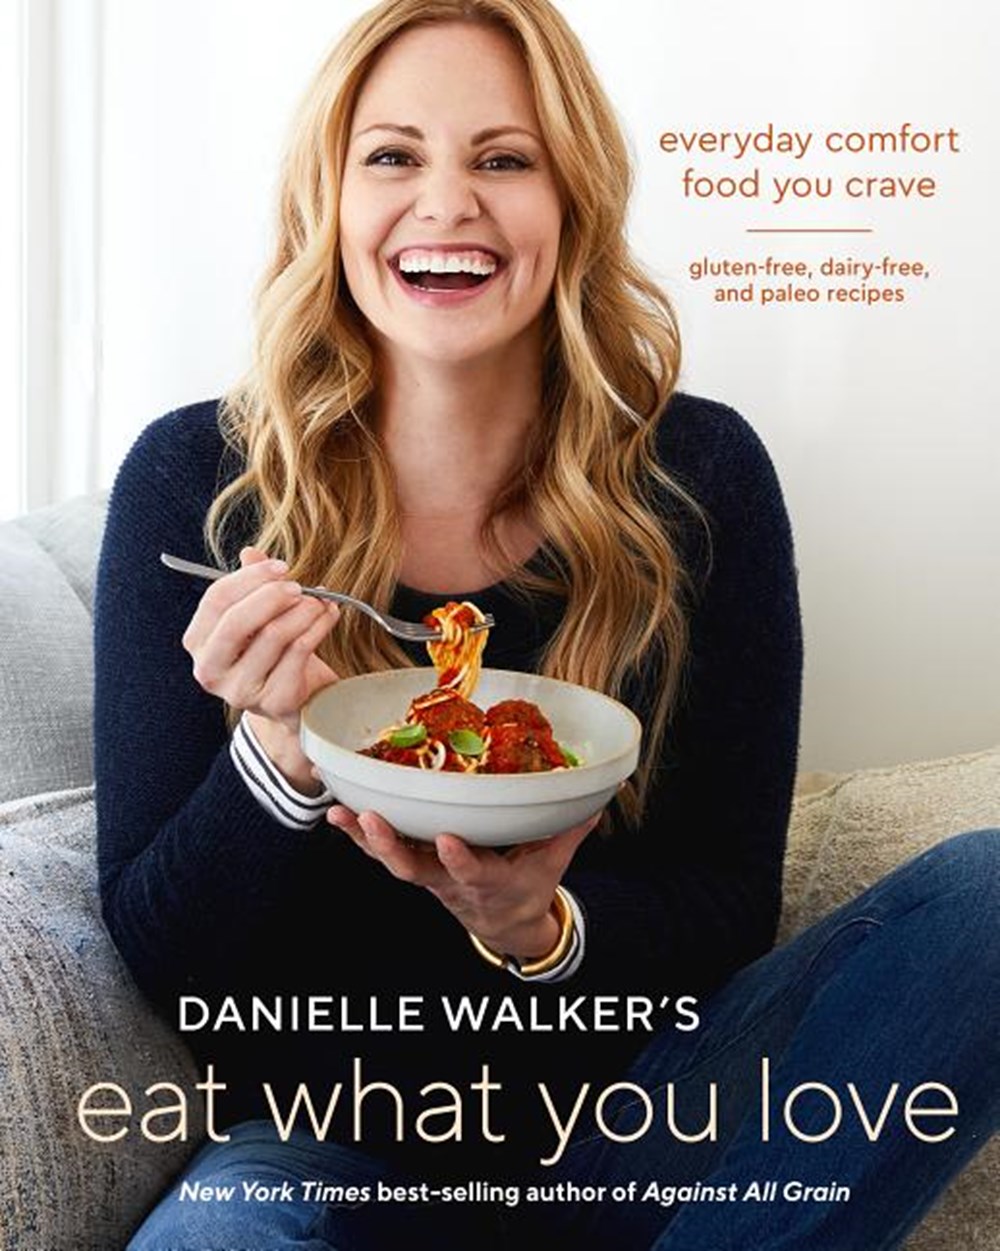 Danielle Walker's Eat What You Love: Everyday Comfort Food You Crave; Gluten-Free, Dairy-Free, and P